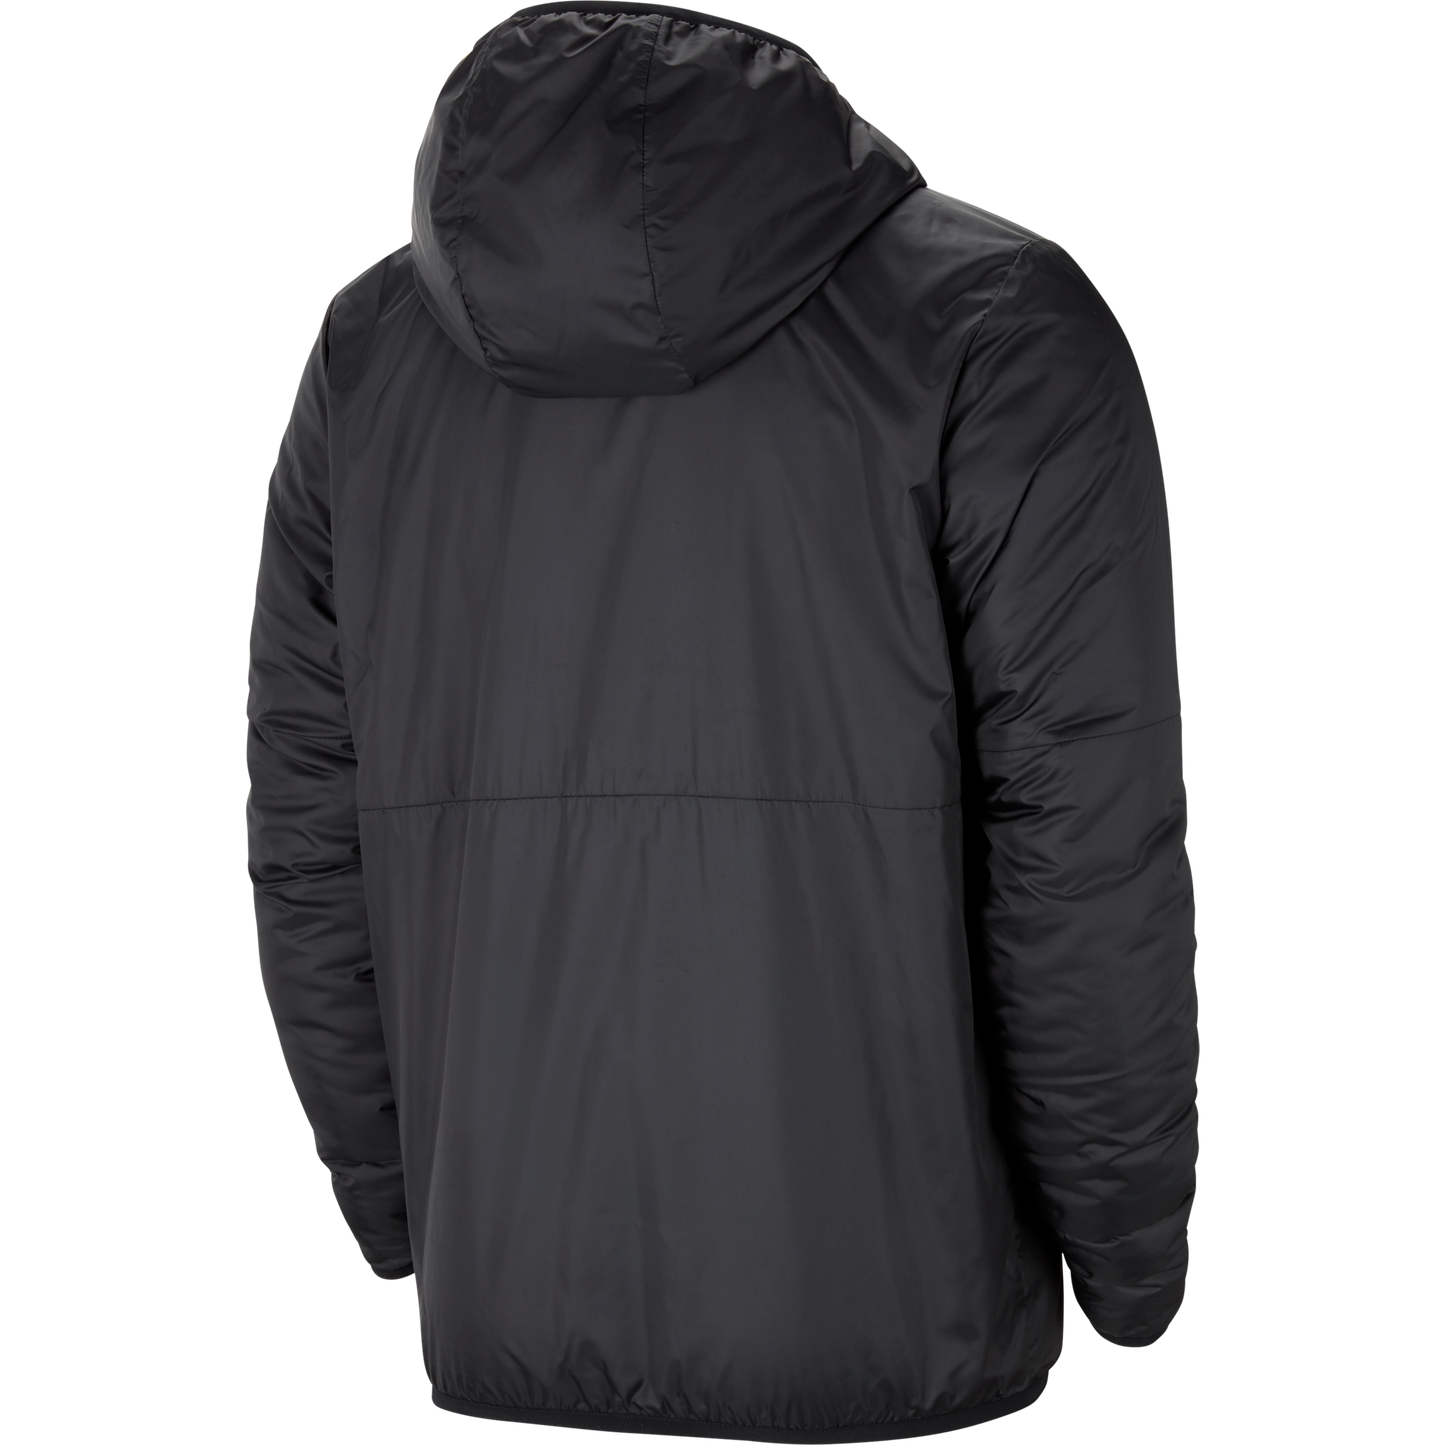 BAY OLYMPIC FC NIKE THERMAL FALL JACKET - WOMEN'S